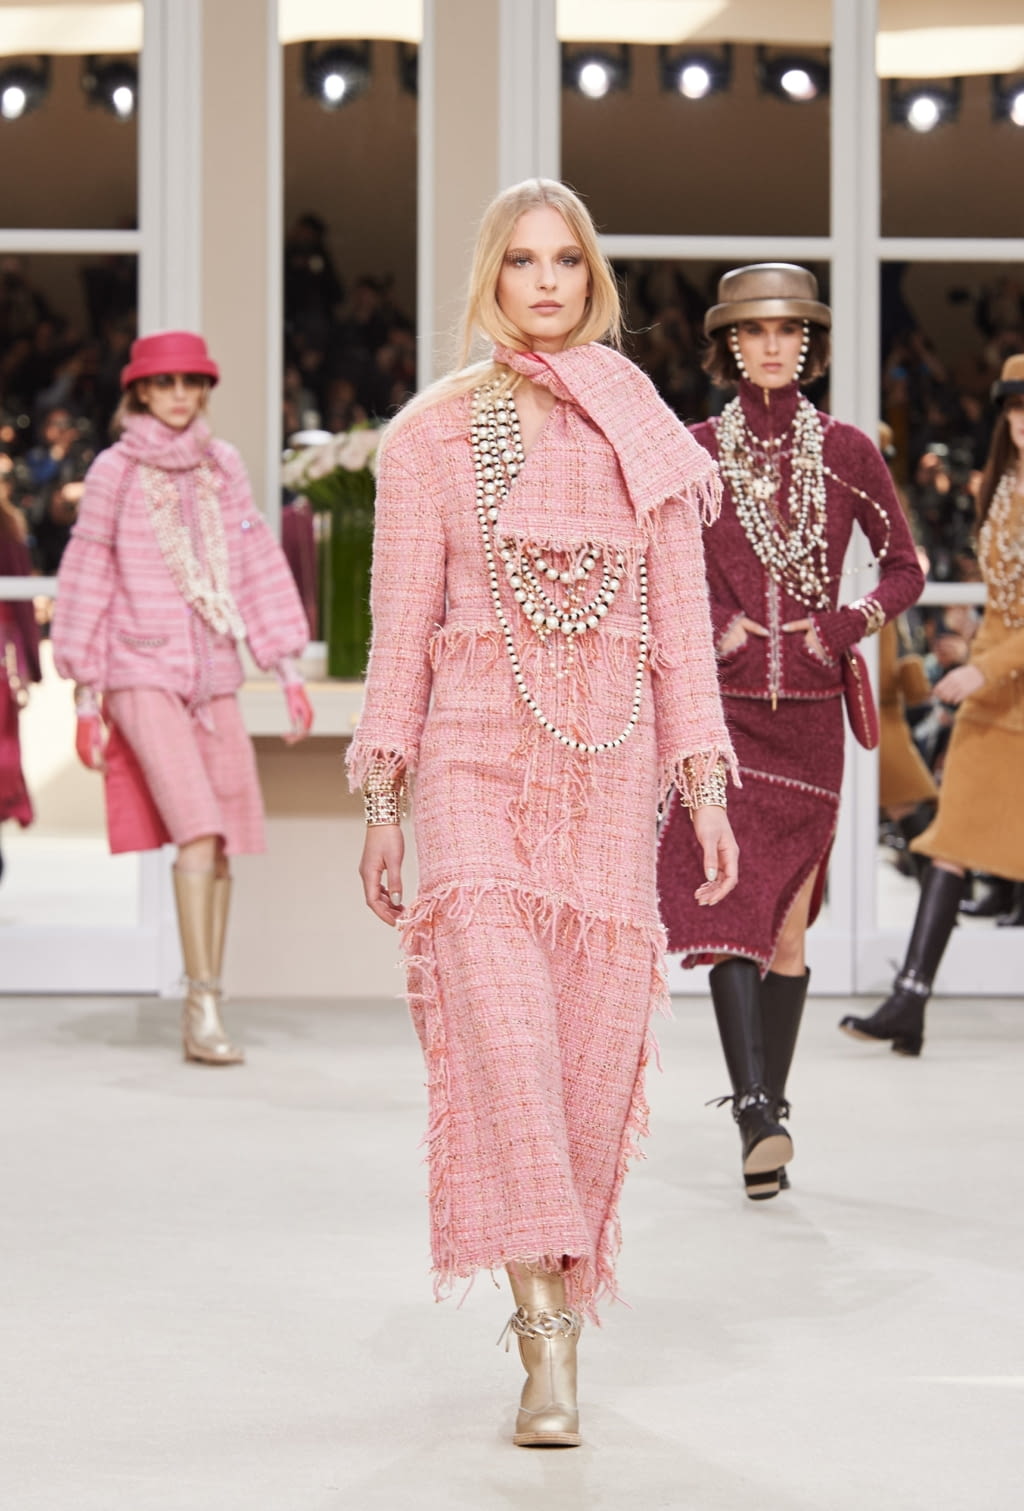 CHANEL on X: Look from the #CHANEL Fall-Winter 2014/15 show in